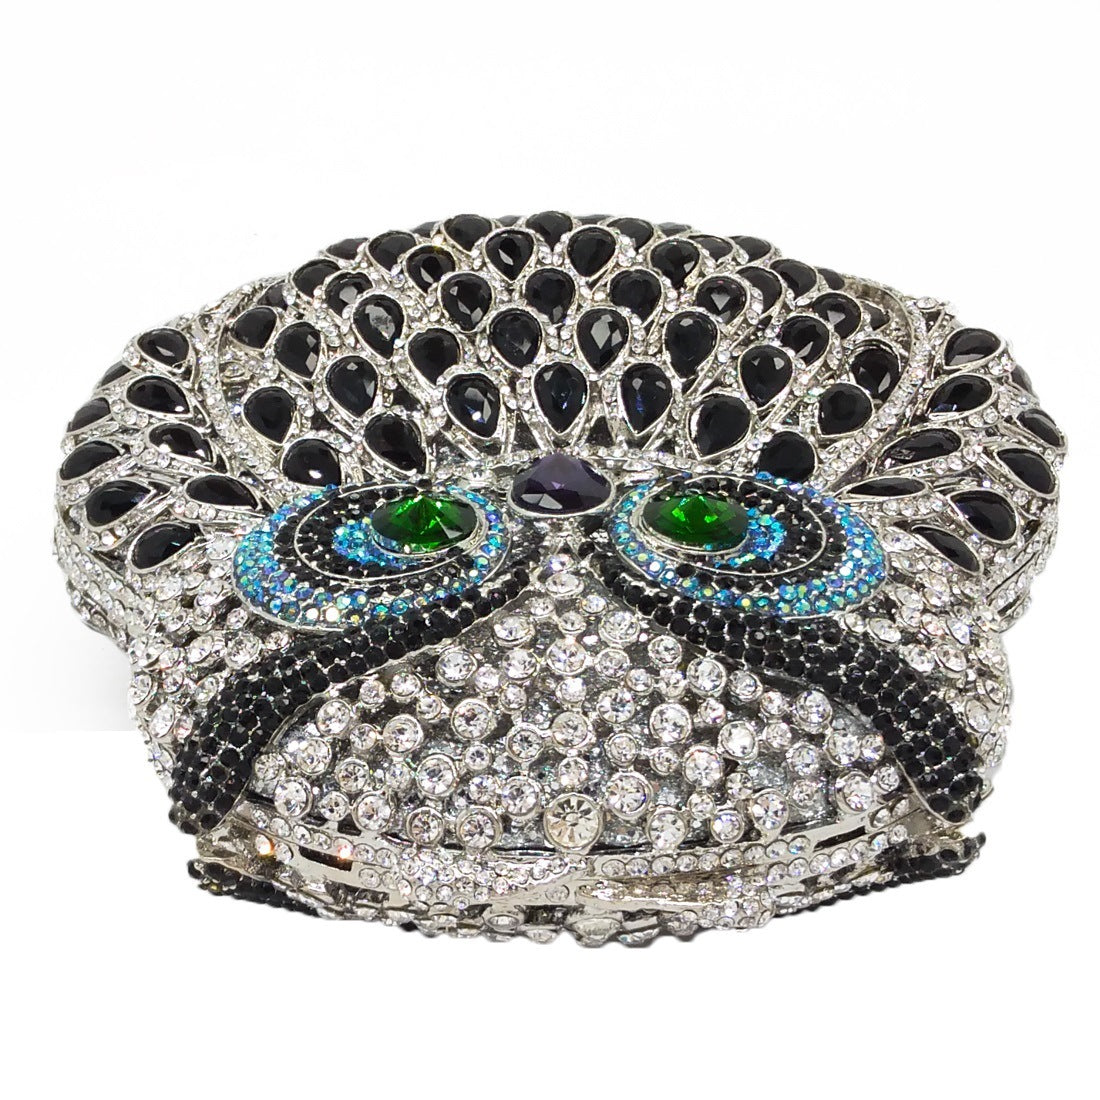 Size: 16*16*5cm ; 16x16x5 centimeters is approximately 6.3 inches x 6.3 inches x 1.97 inches in imperial measurements; Material: Primarily Rhinestone - Multi colored Applicable scene: Dinner,Banquet, Evening, Party, Prom, Bridal Clutch Bag. This is a fully jeweled mini clutch bag. This picture shows the style that is primarily black and white with light blue around the eyes and green in the pupil eye area. This picture also depicts a laying down view to give context to the size of the bag. 